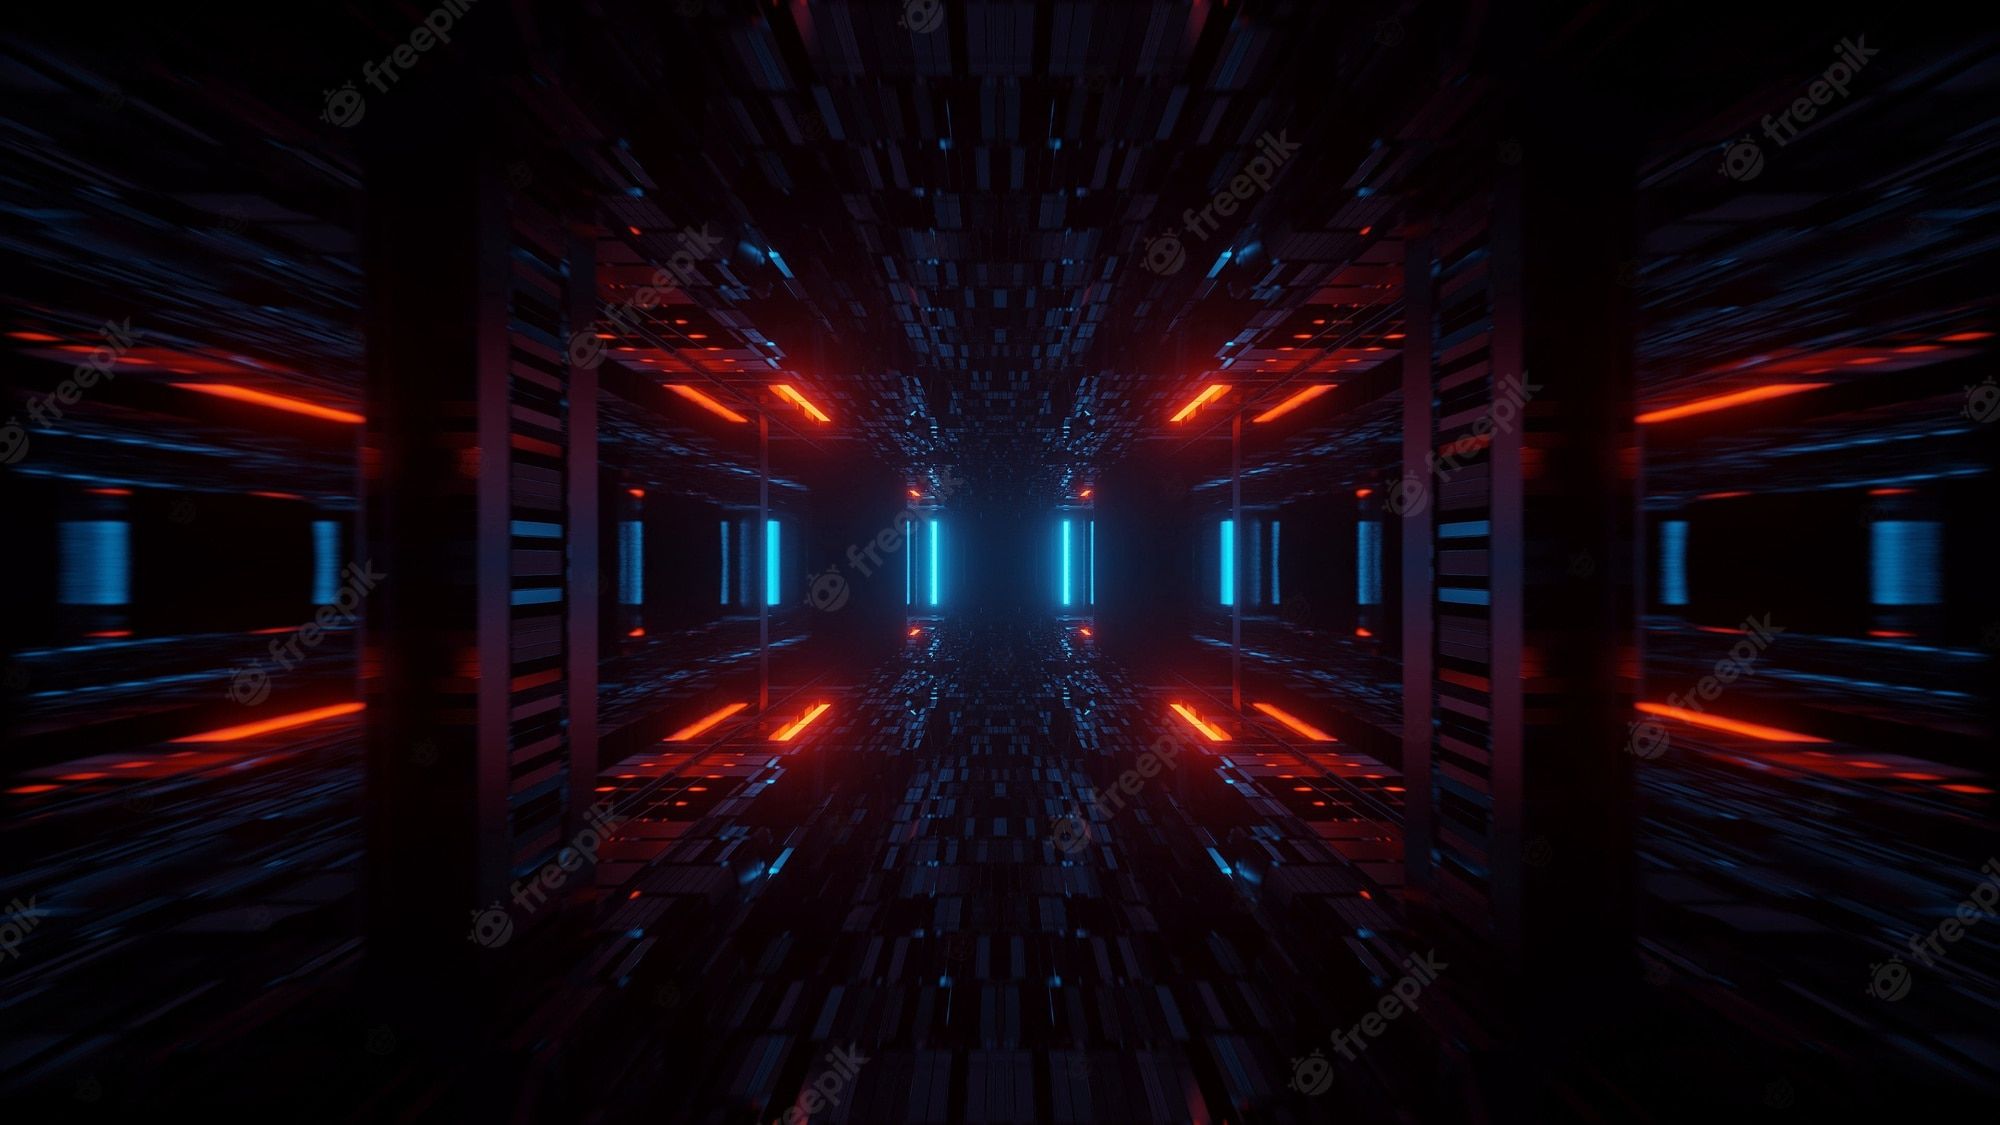 Abstract futuristic tunnel with neon lights - Alien